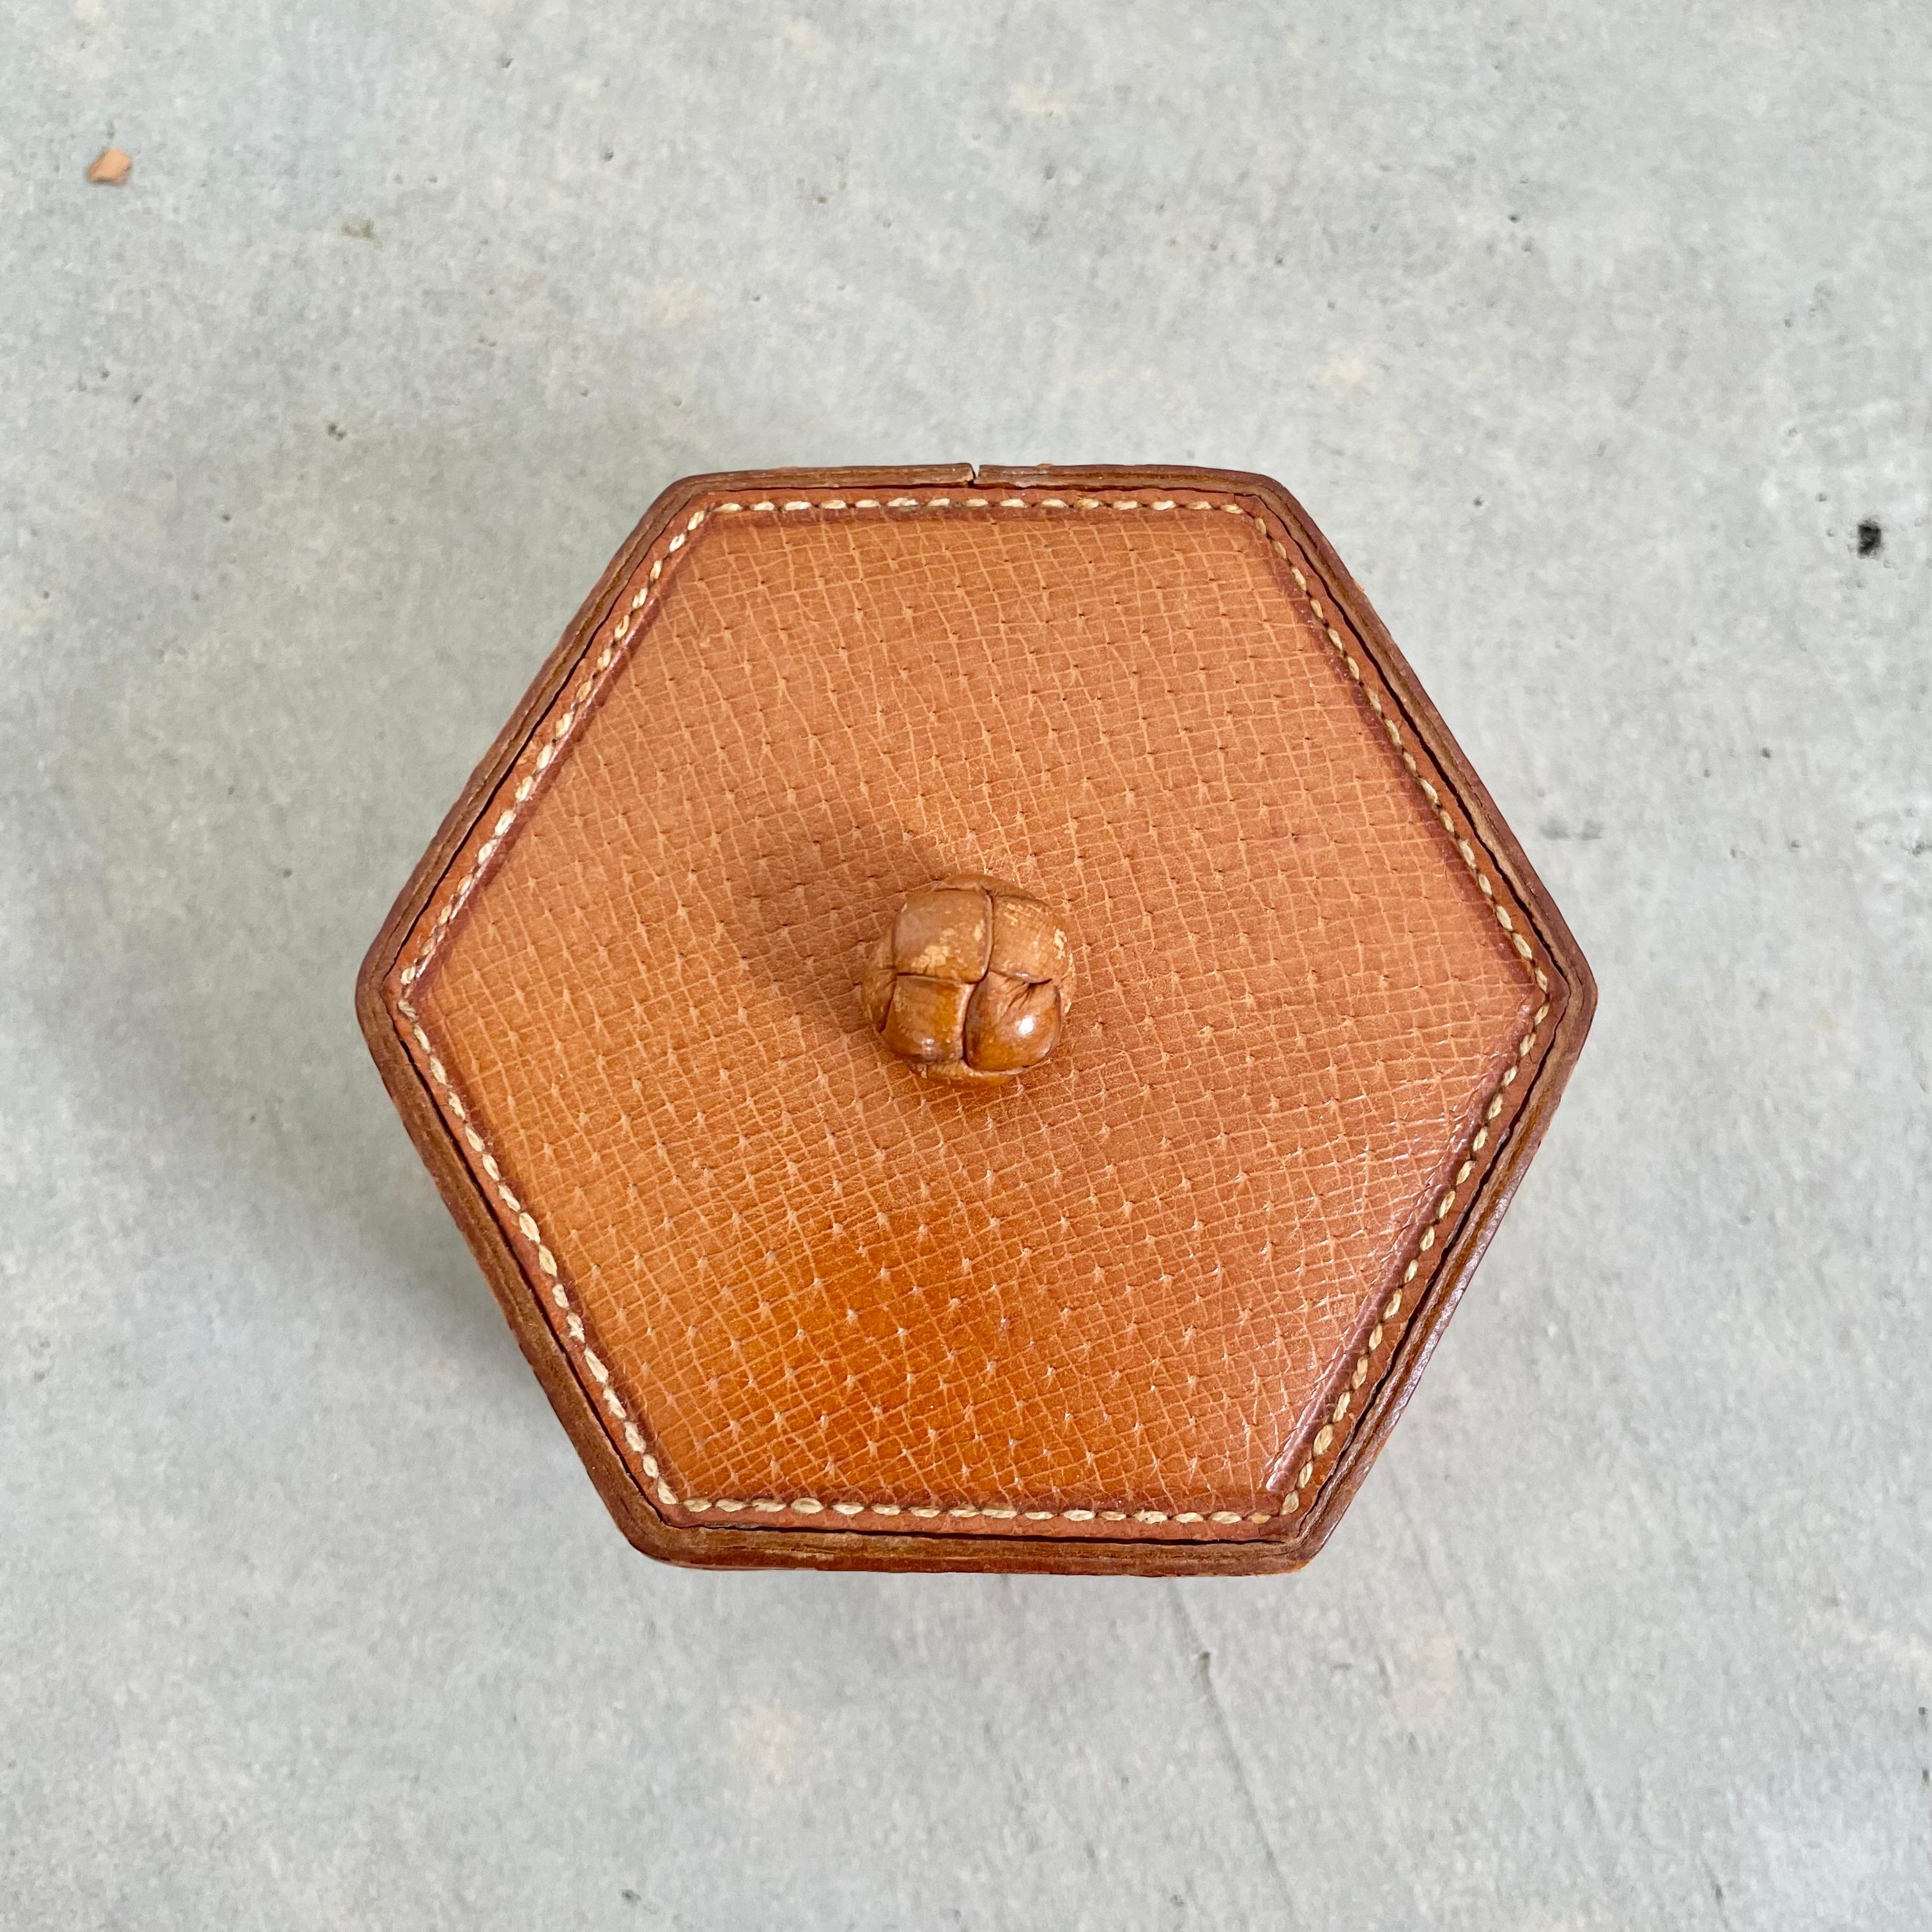 Leather French box in a small size perfect for storing jewelry and other trinkets. Made of beautiful tan saddle leather in great condition with a woven leather ball attached to the top as decoration and also to open the box. Great for a desk or